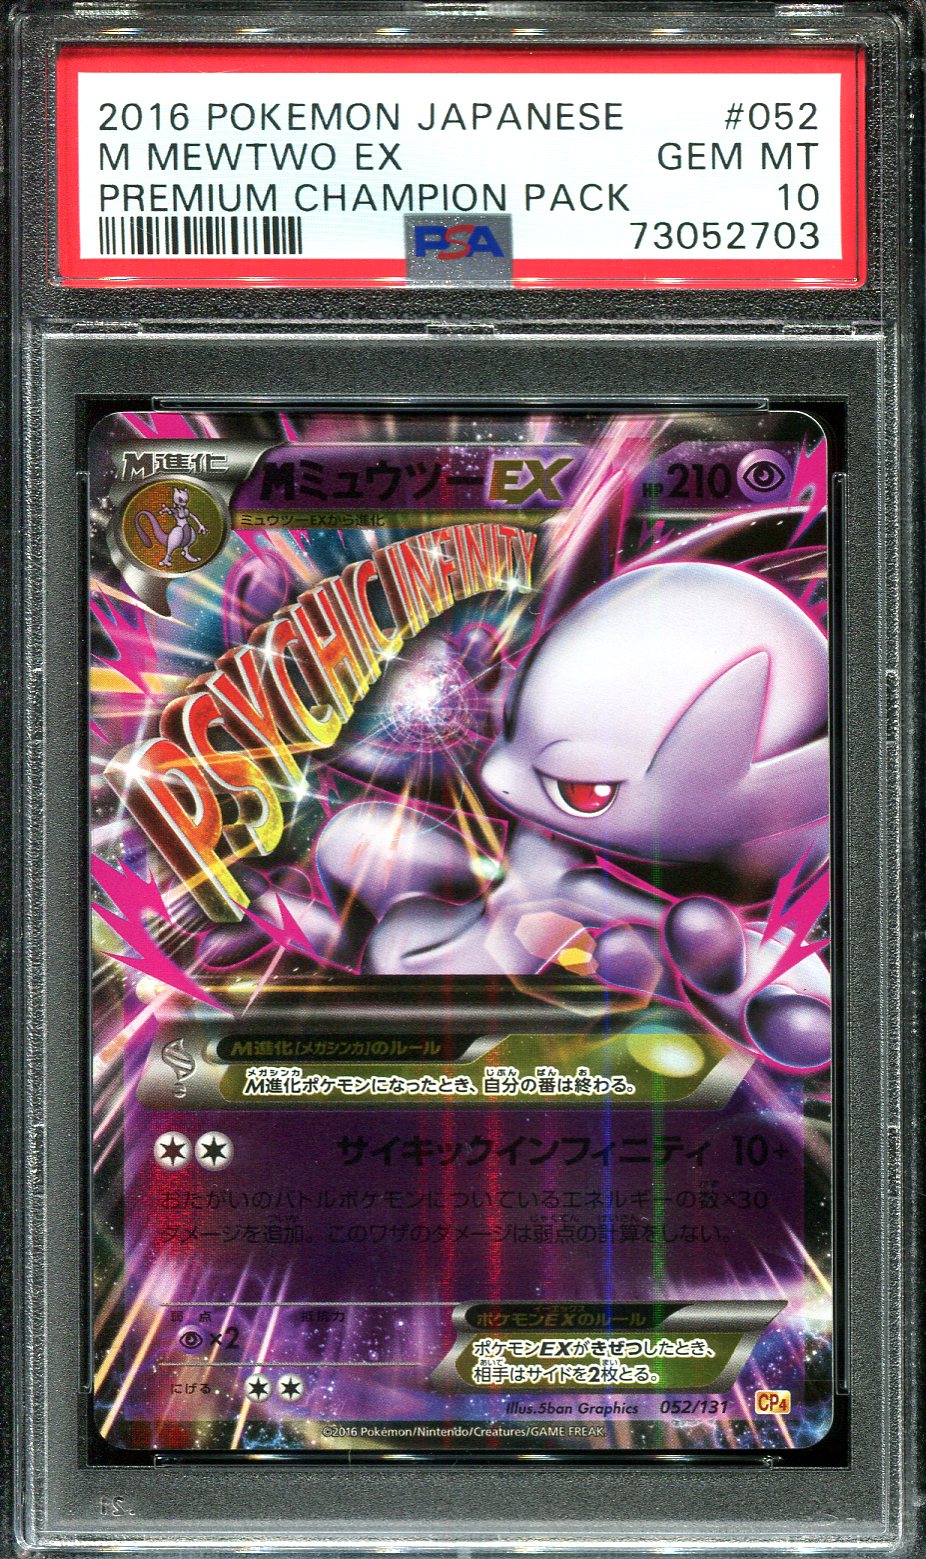 PSA 9 Time Space Distortion Holo Japanese Mewtwo LV. X Pack 2009 Pokemon  #012